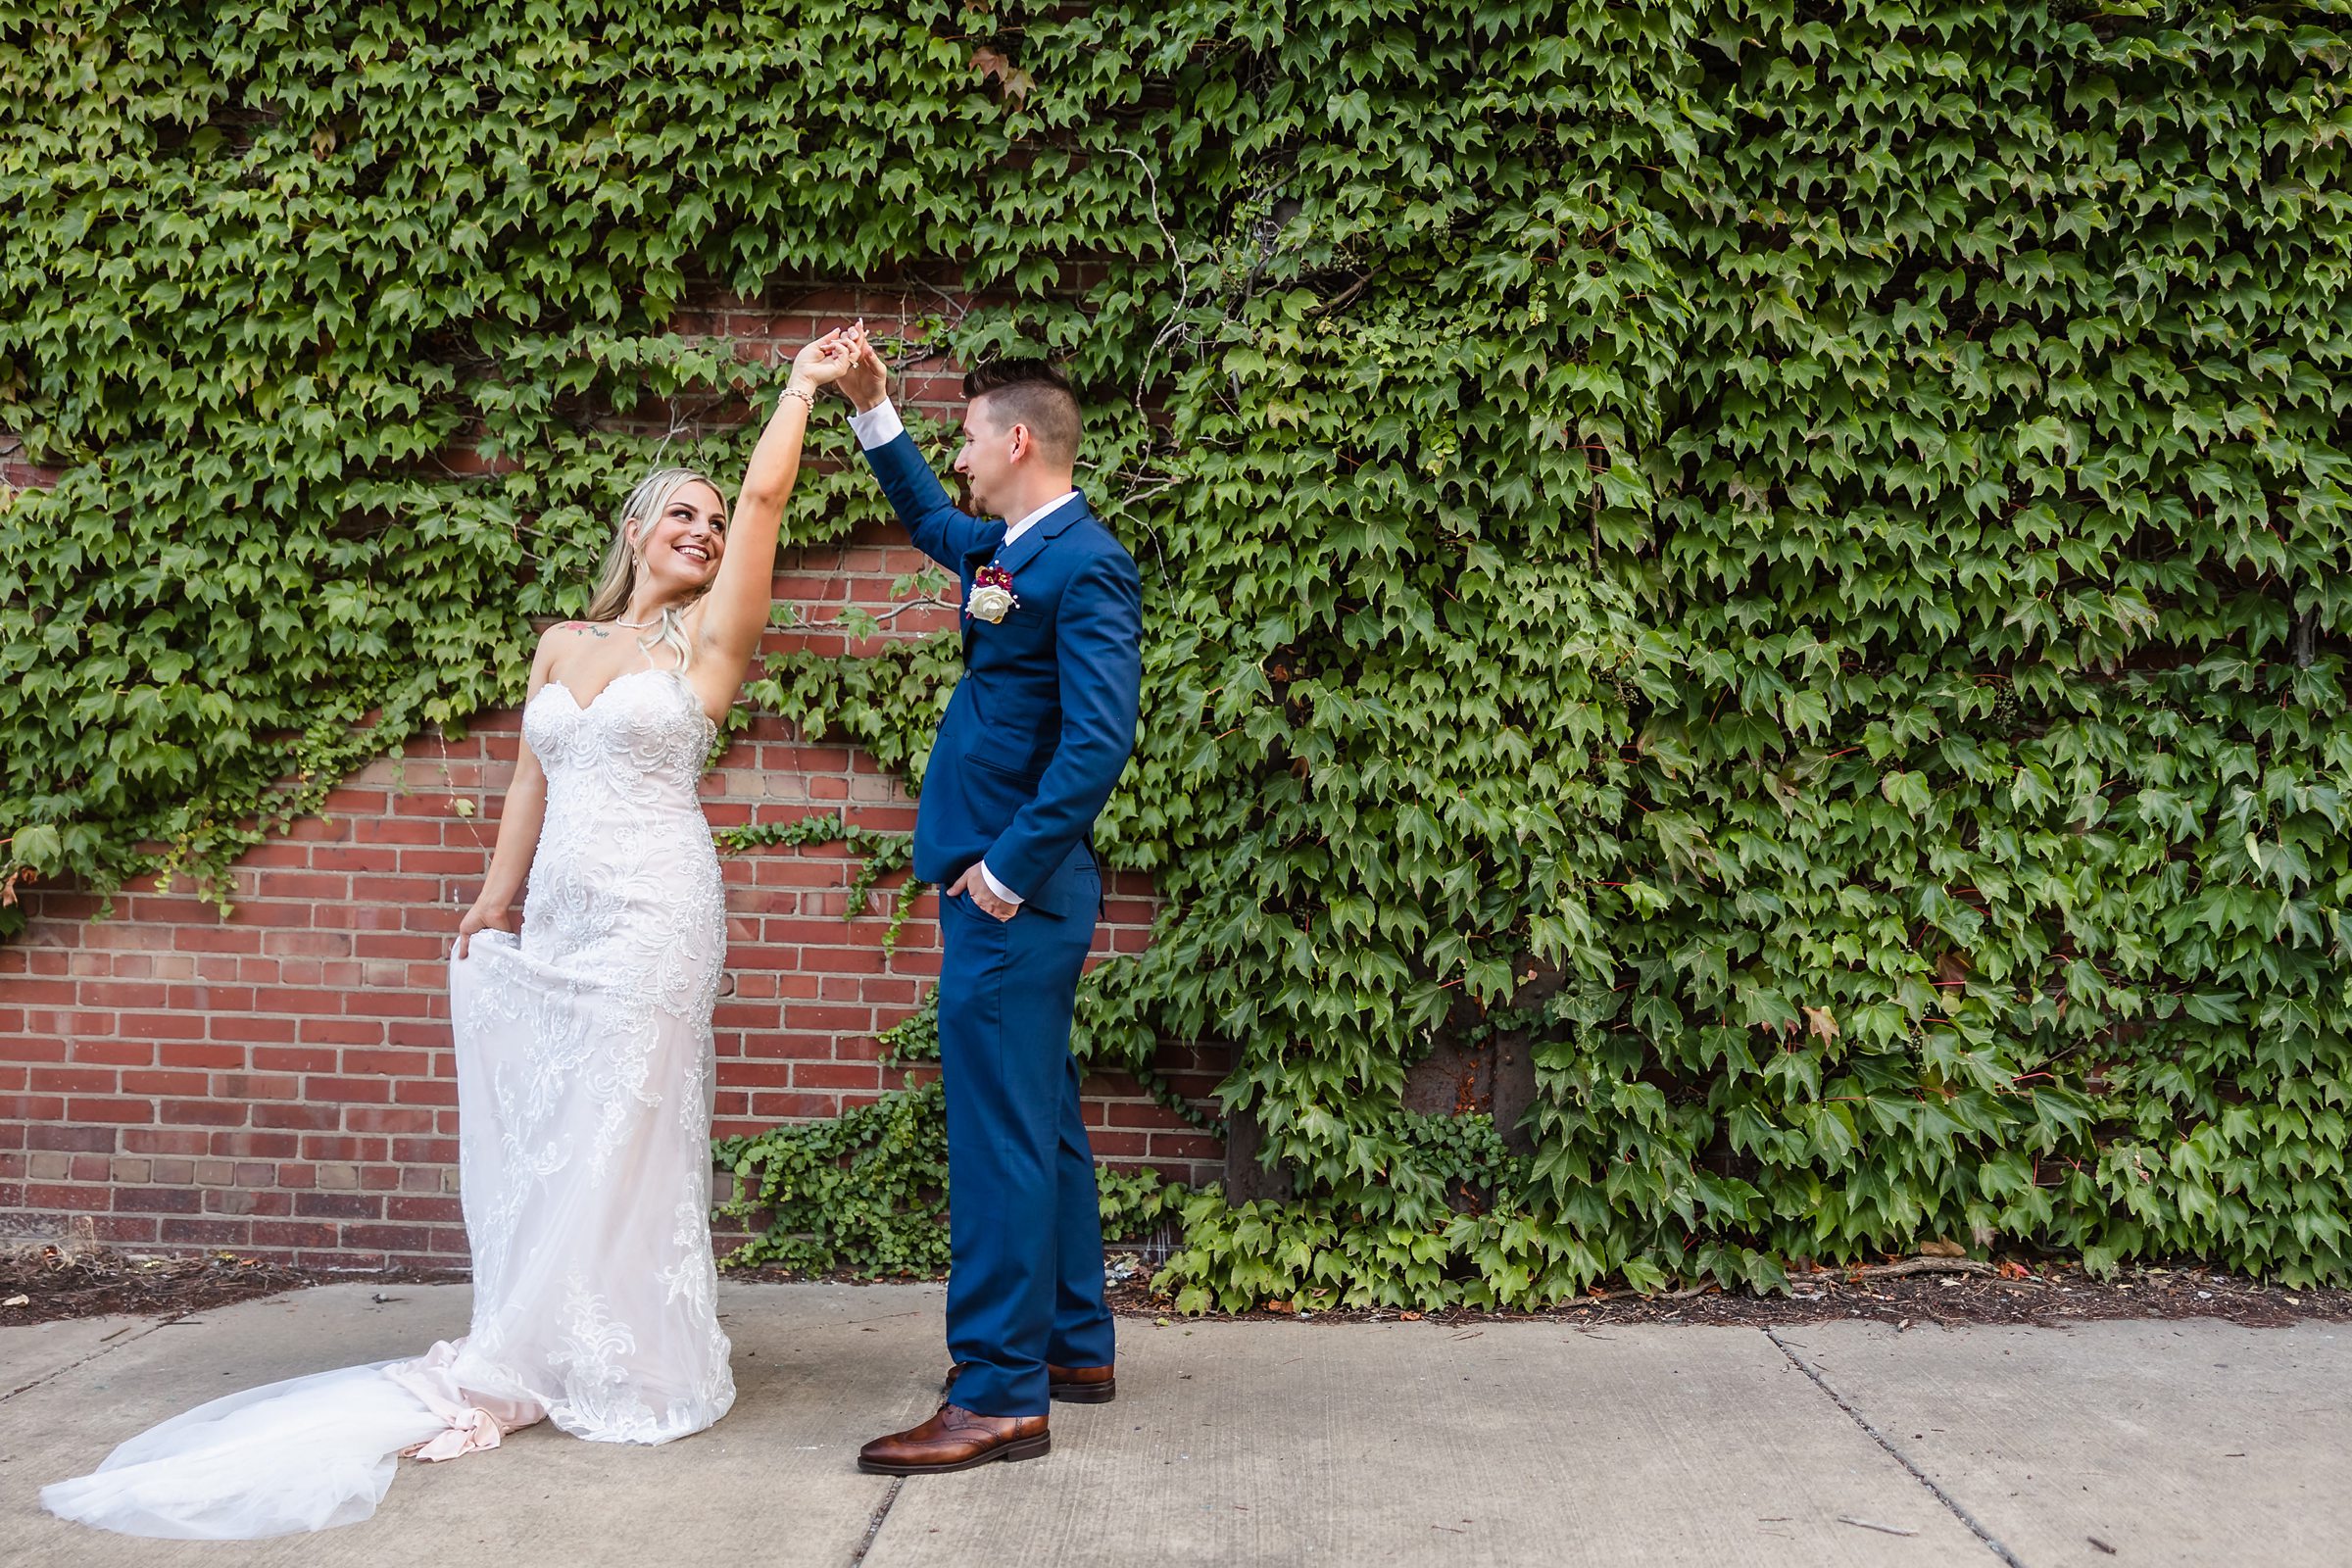 Bride and Groom embrace after their wedding ceremony at the Warehouse on State in Peoria, Illinois